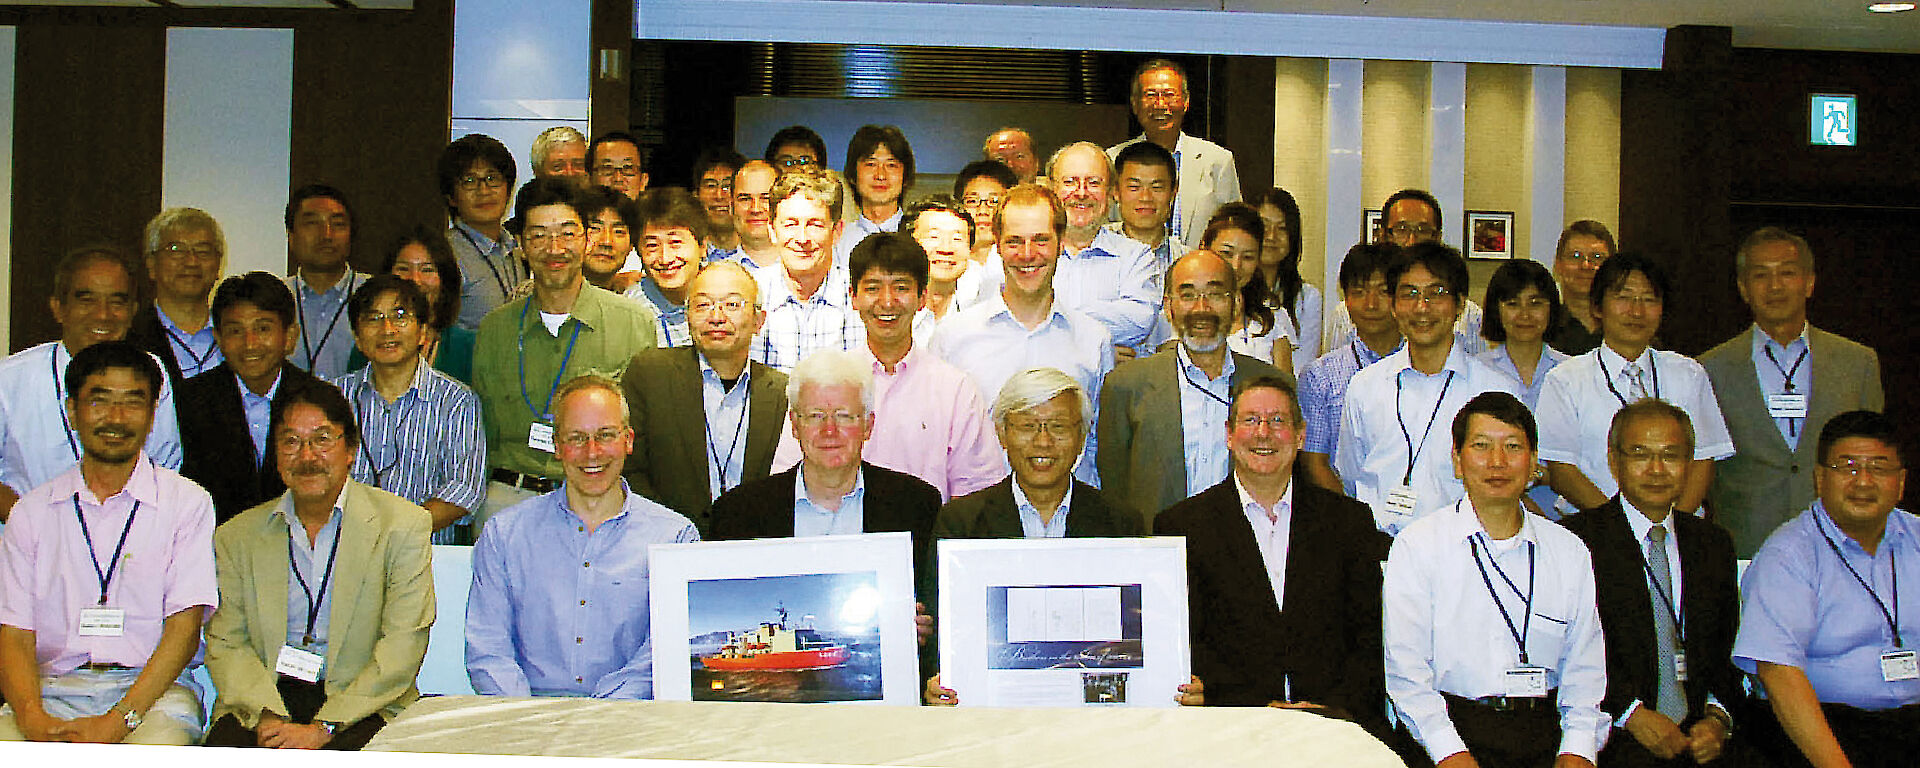 A group of Australian and Japanese scientists at a meeting in Tokyo